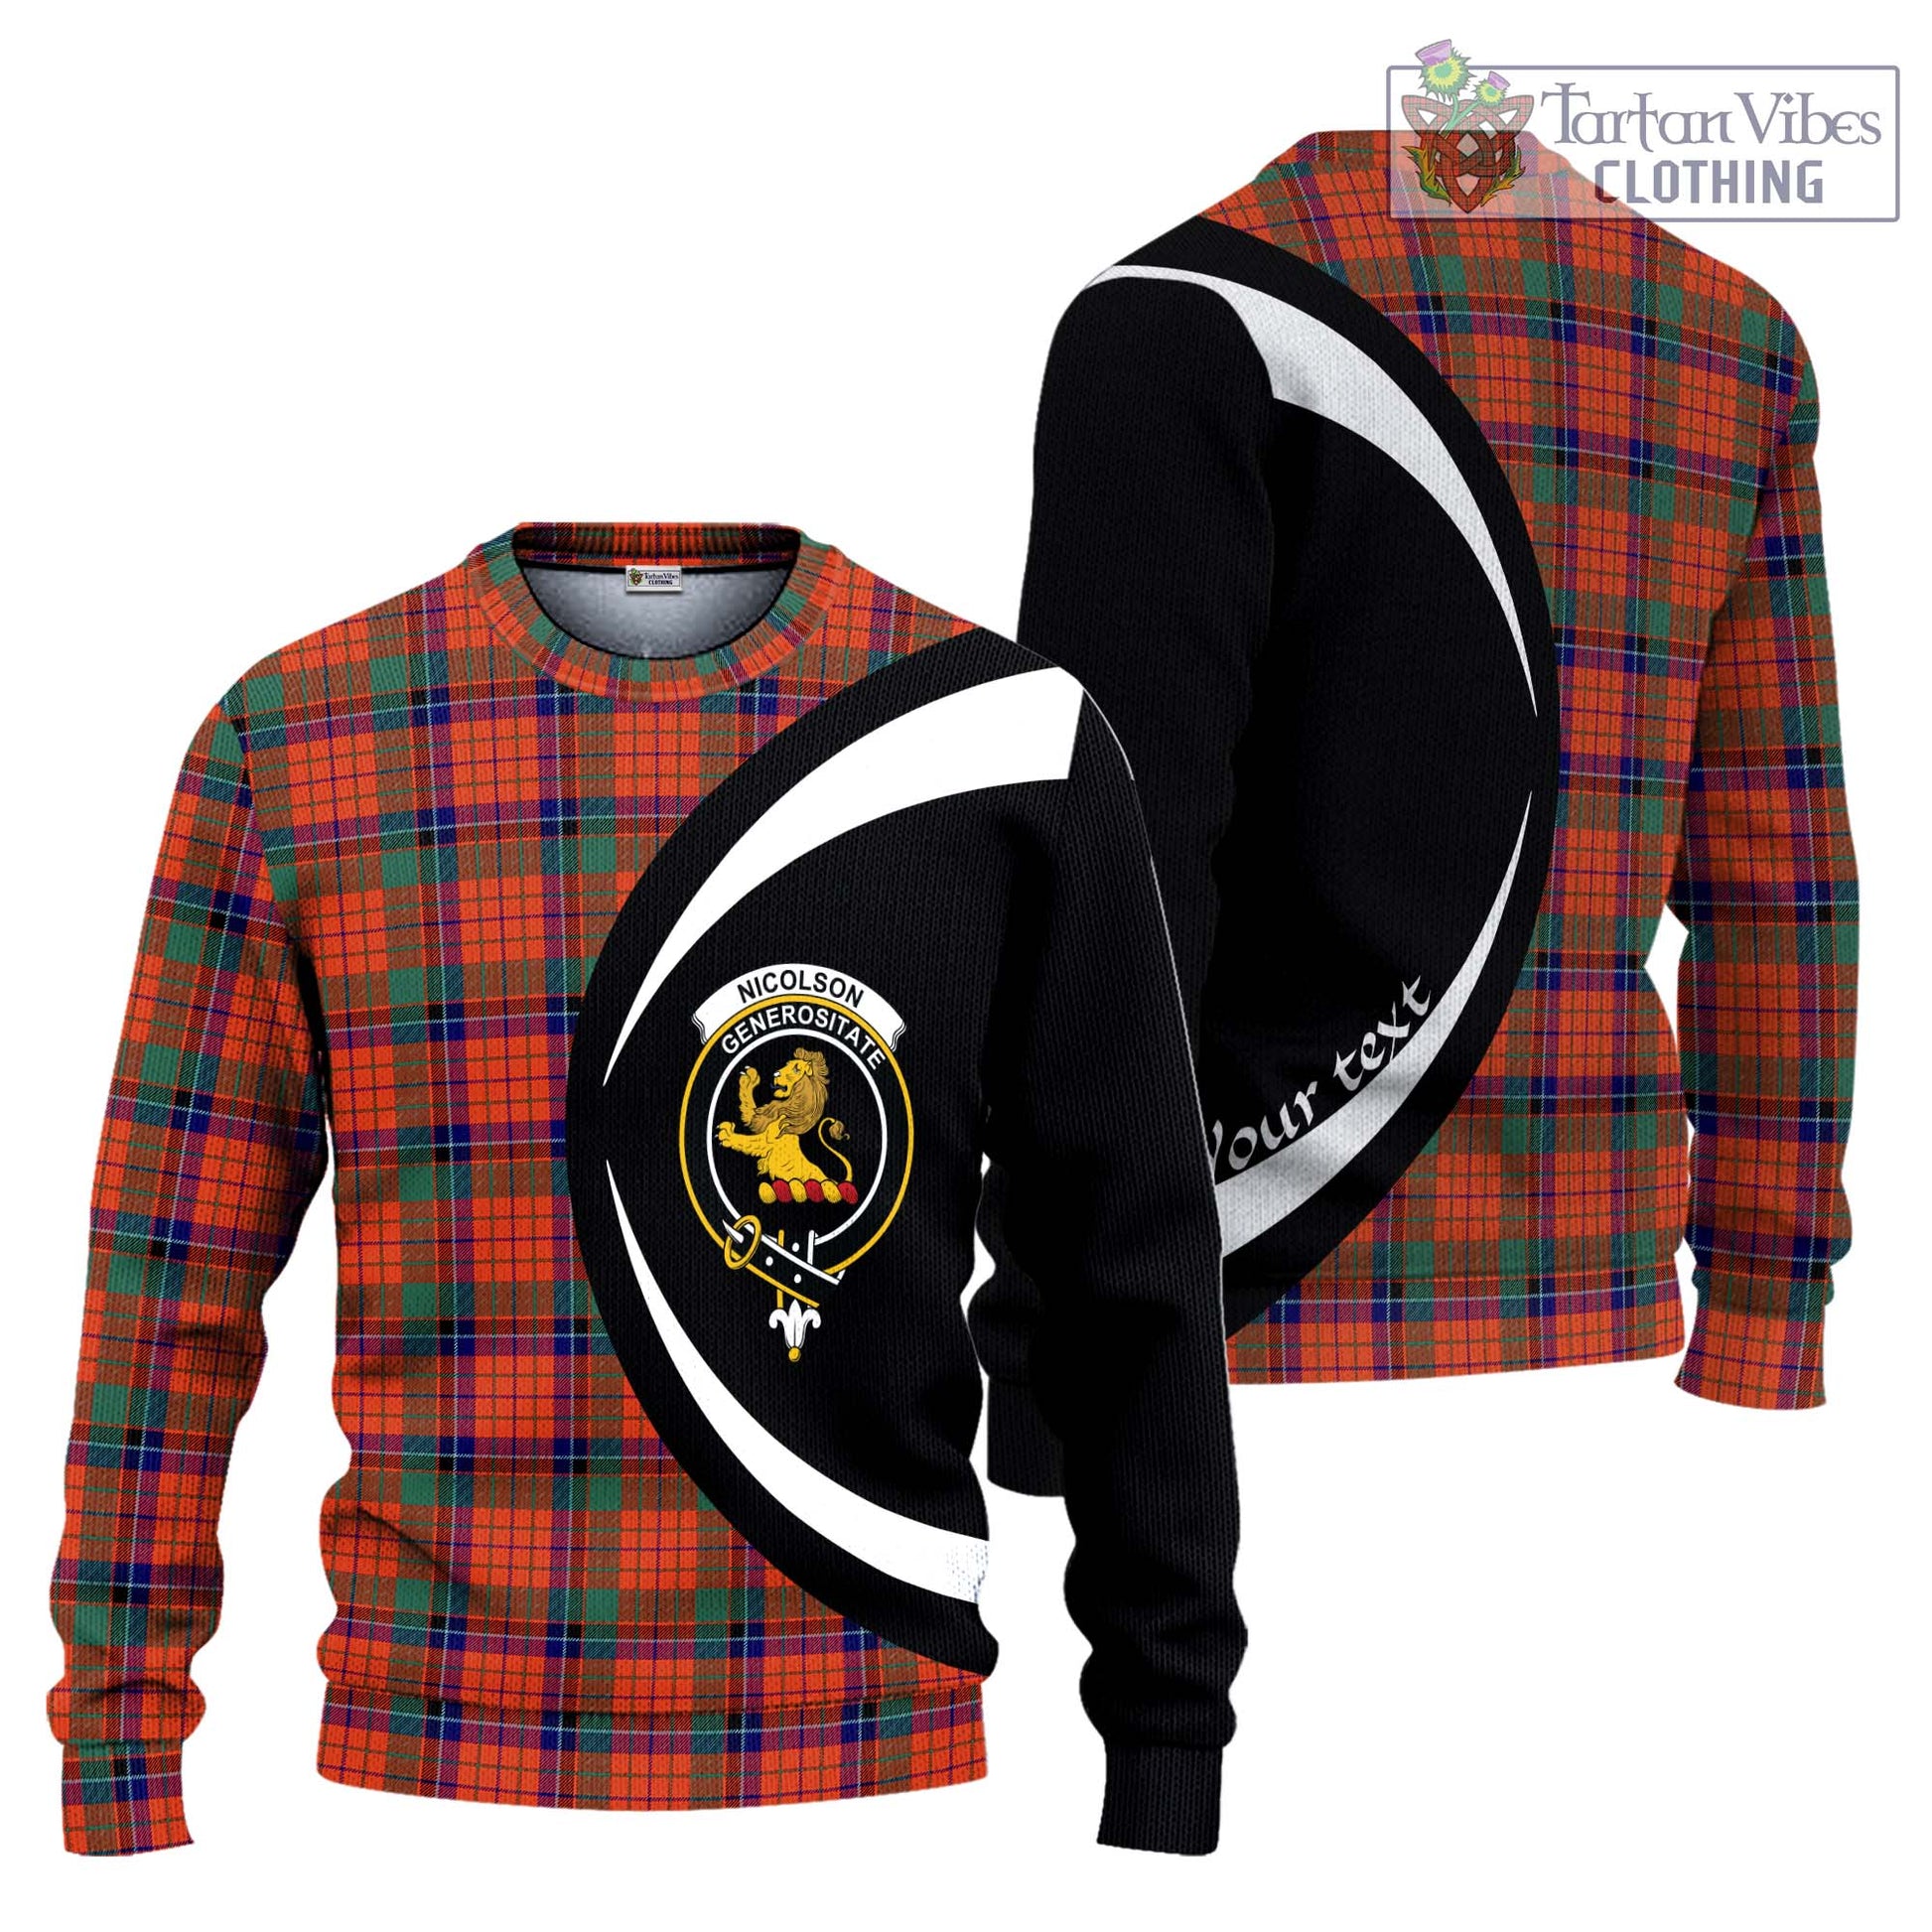 Tartan Vibes Clothing Nicolson Ancient Tartan Knitted Sweater with Family Crest Circle Style